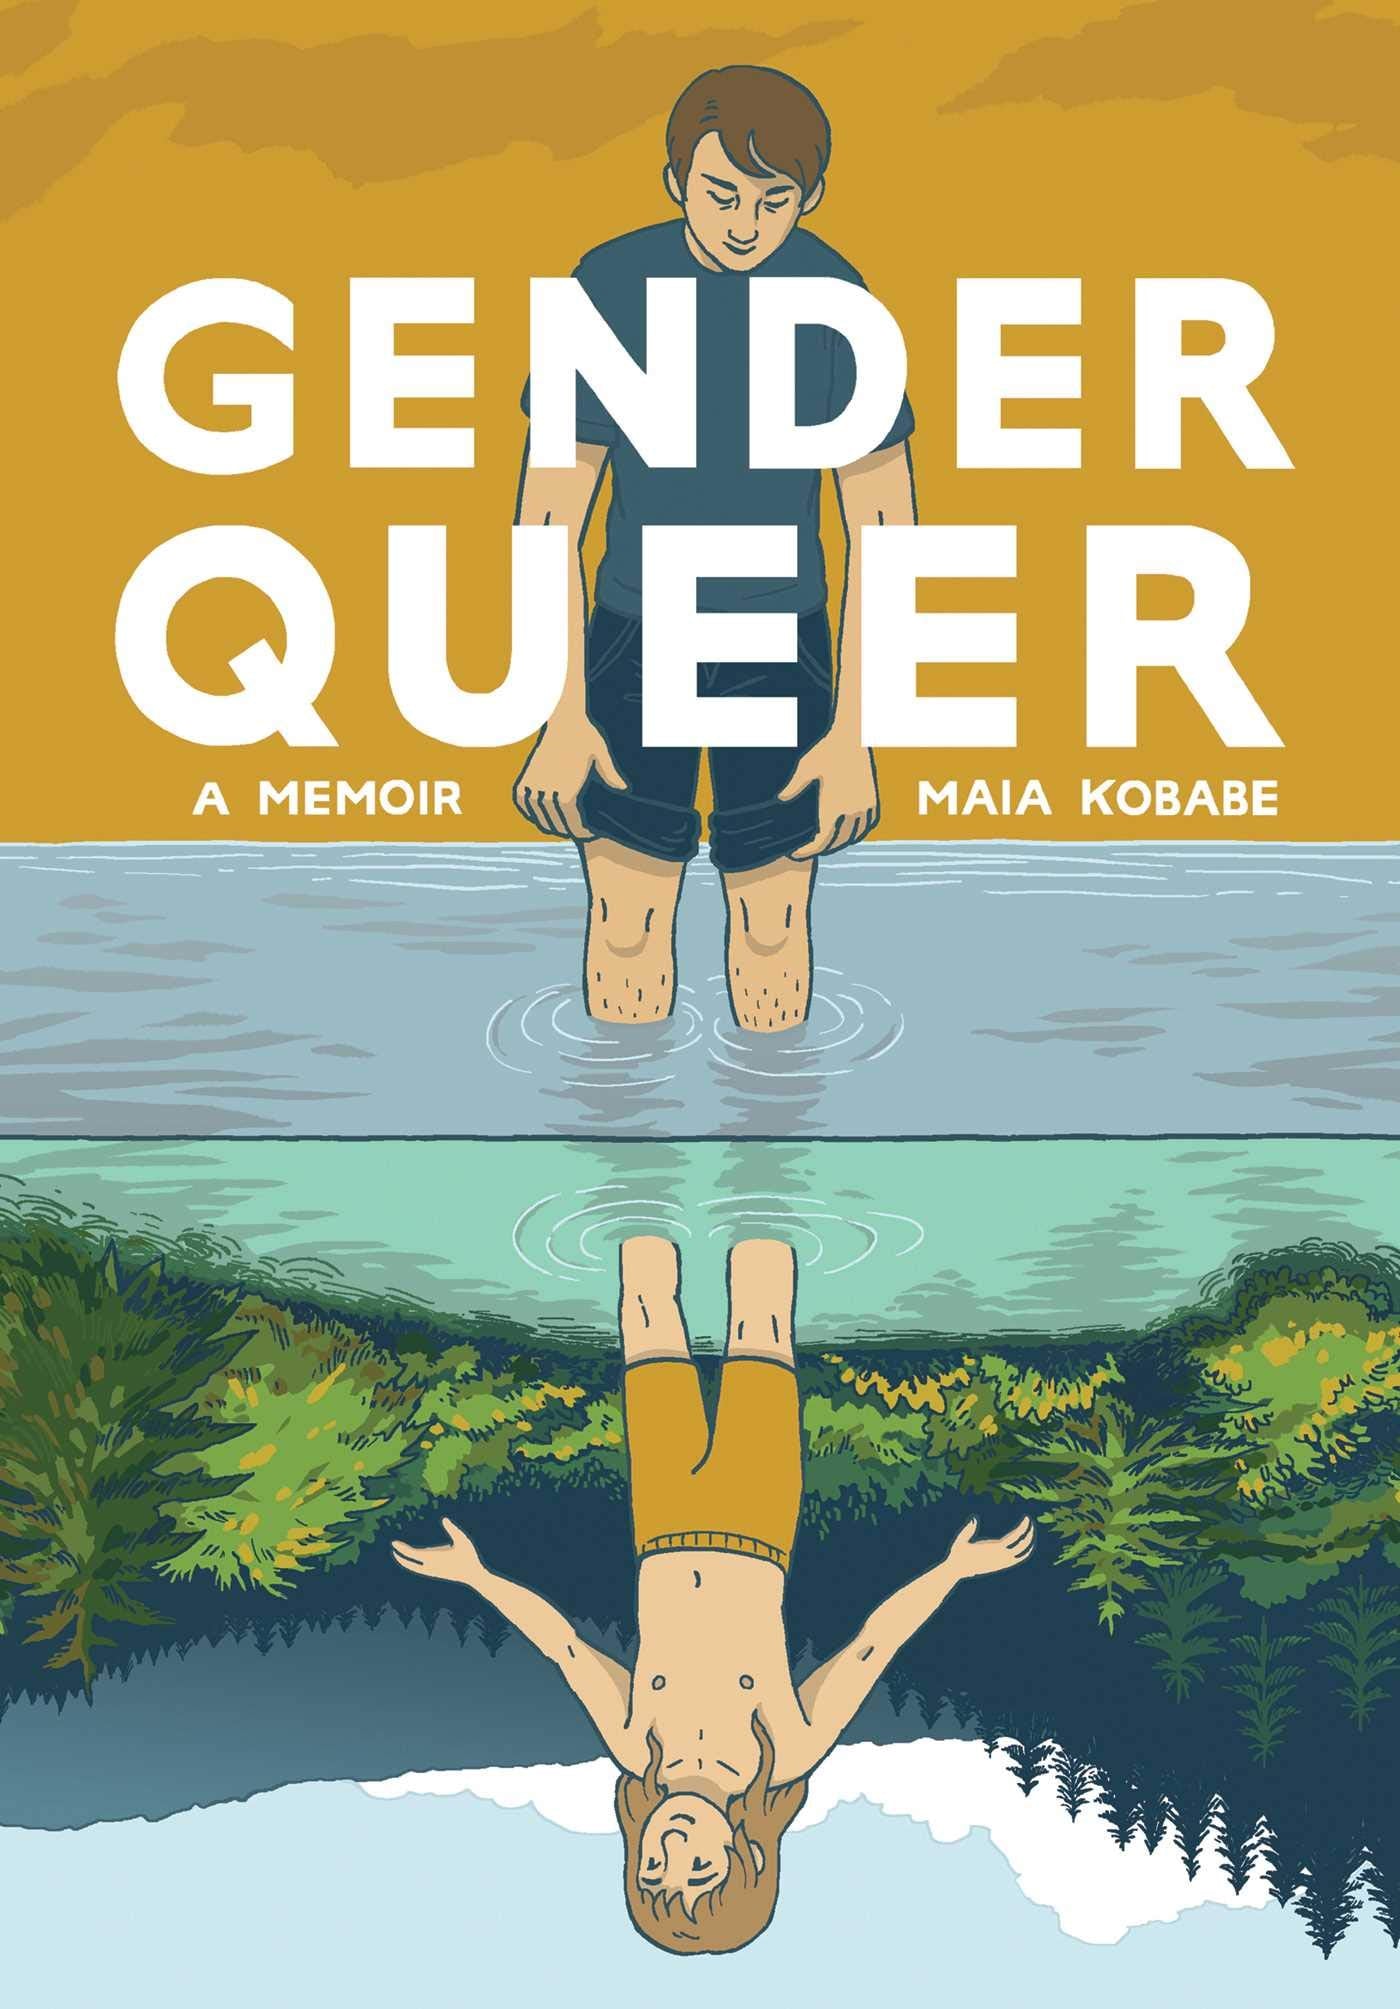 Gender Queer, by Maia Kobabe